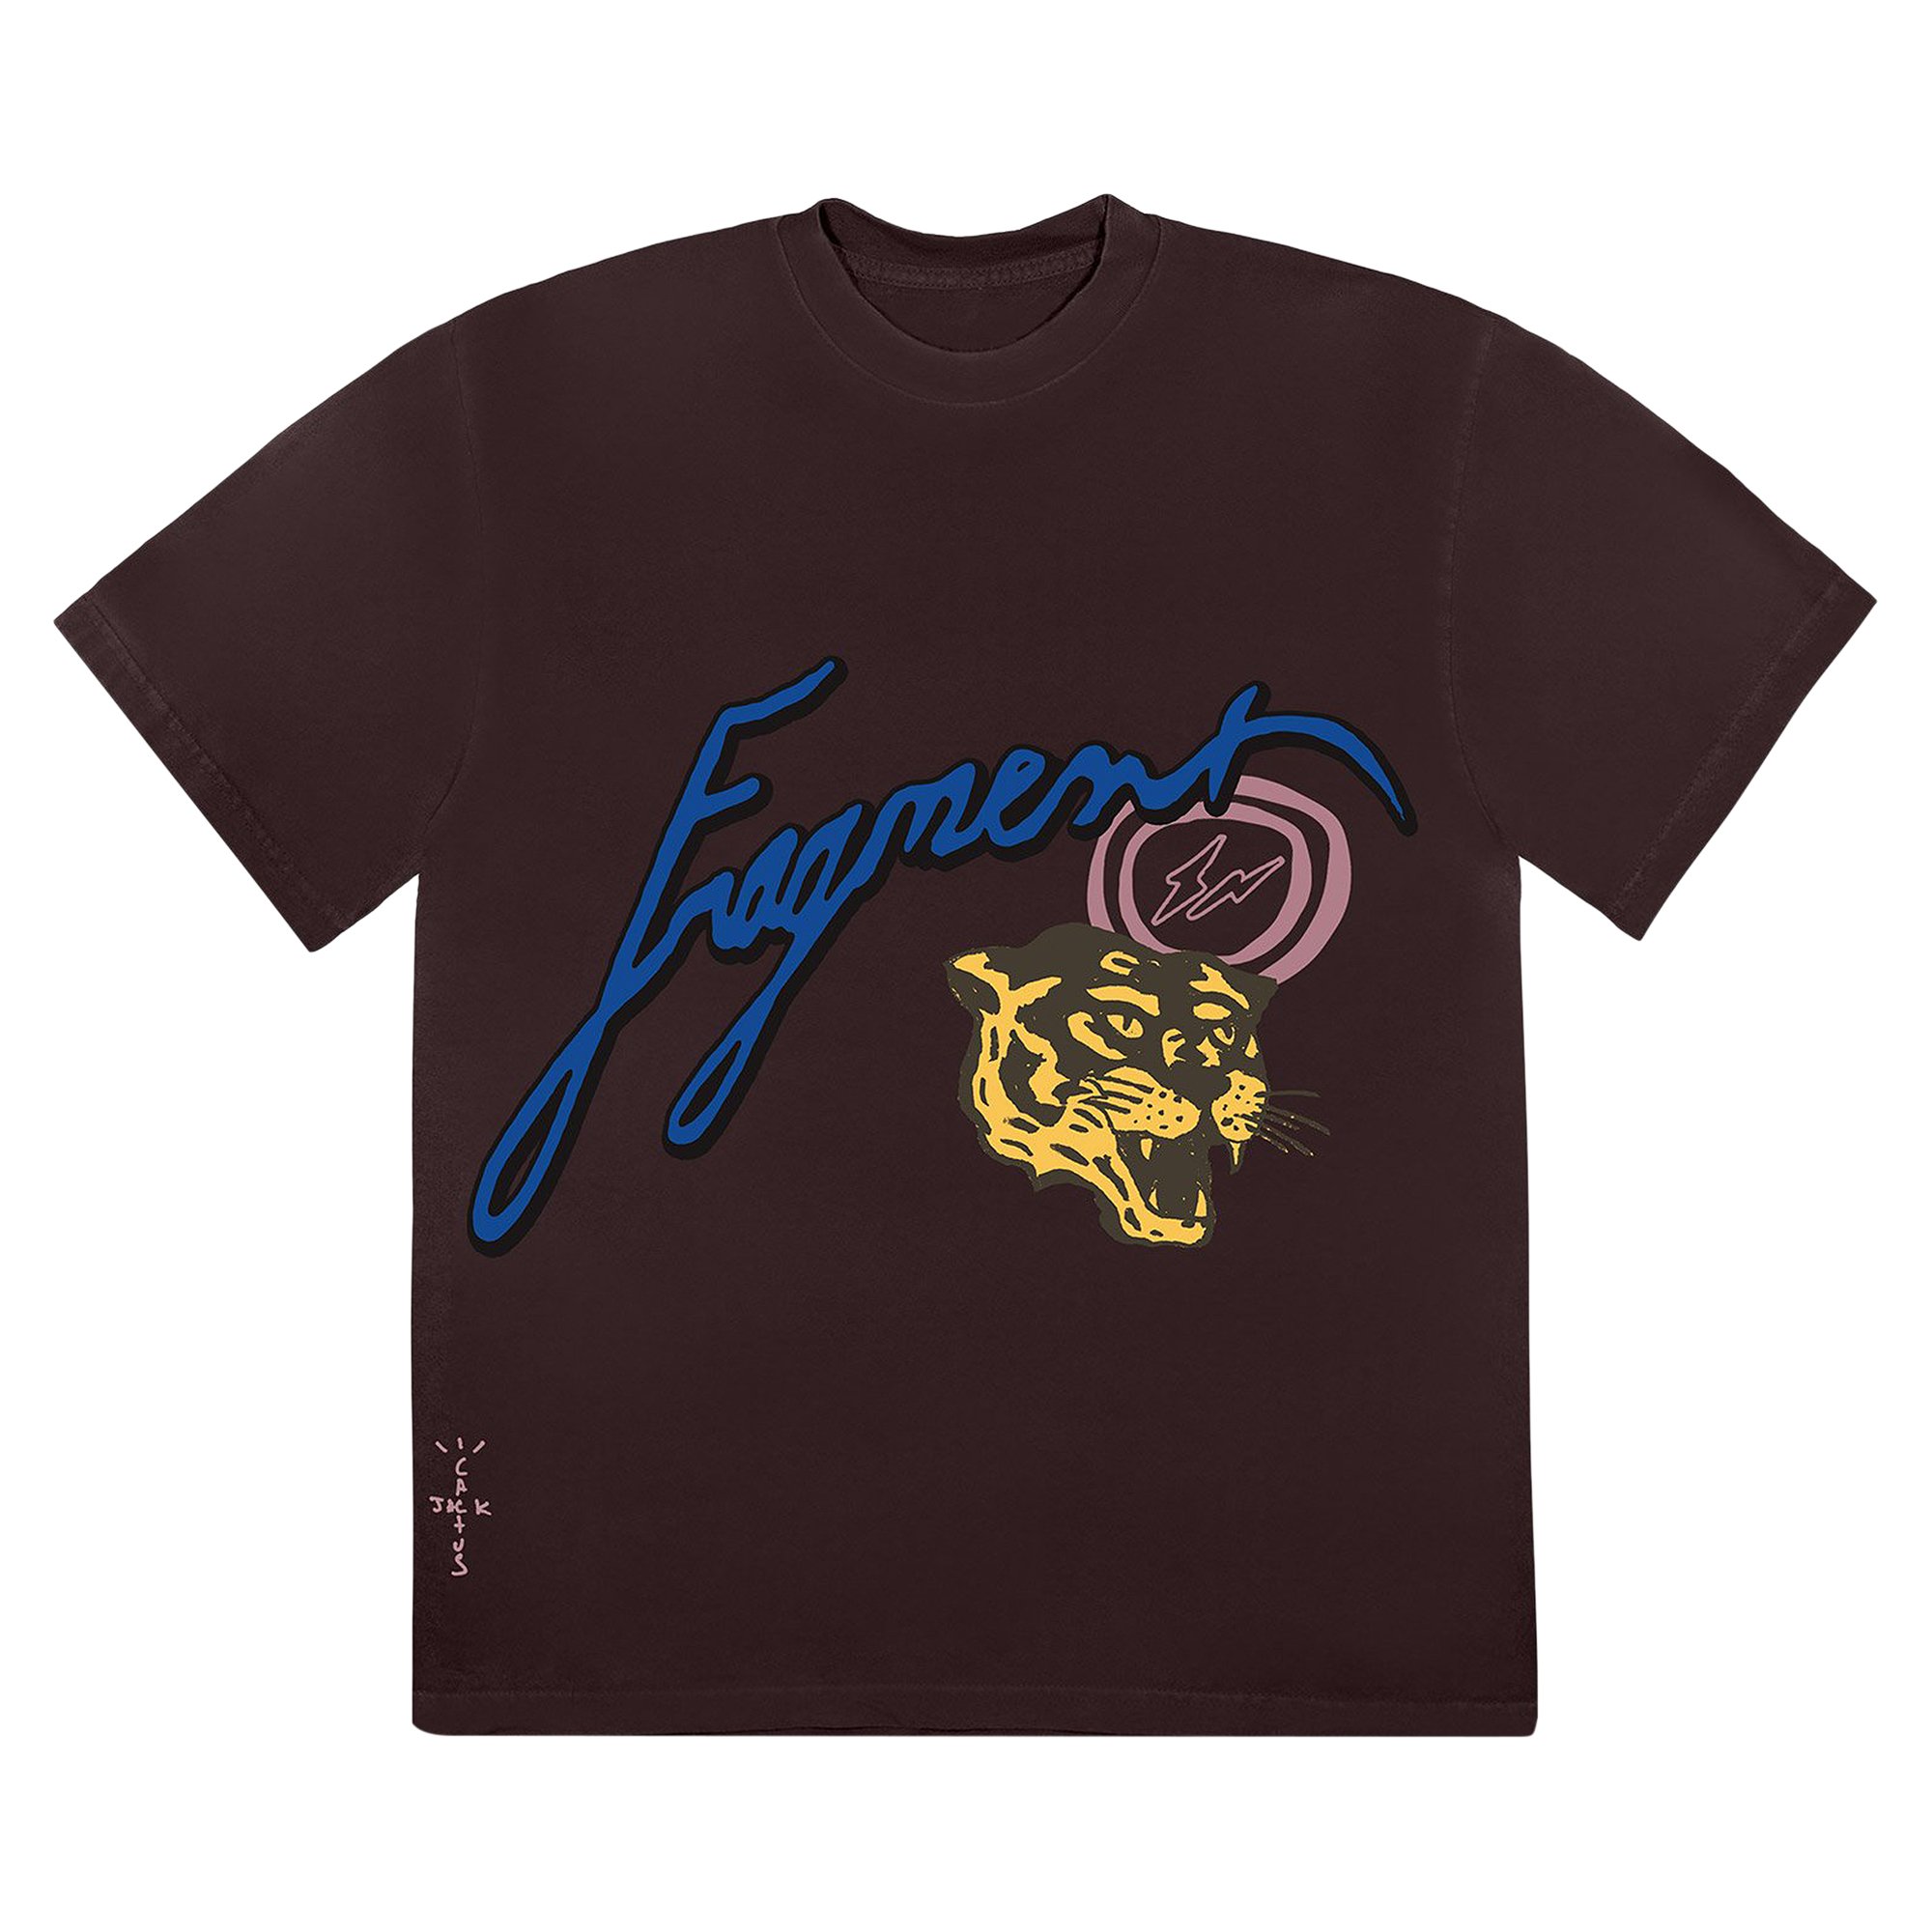 Cactus Jack by Travis Scott For Fragment Icons Tee 'Brown'